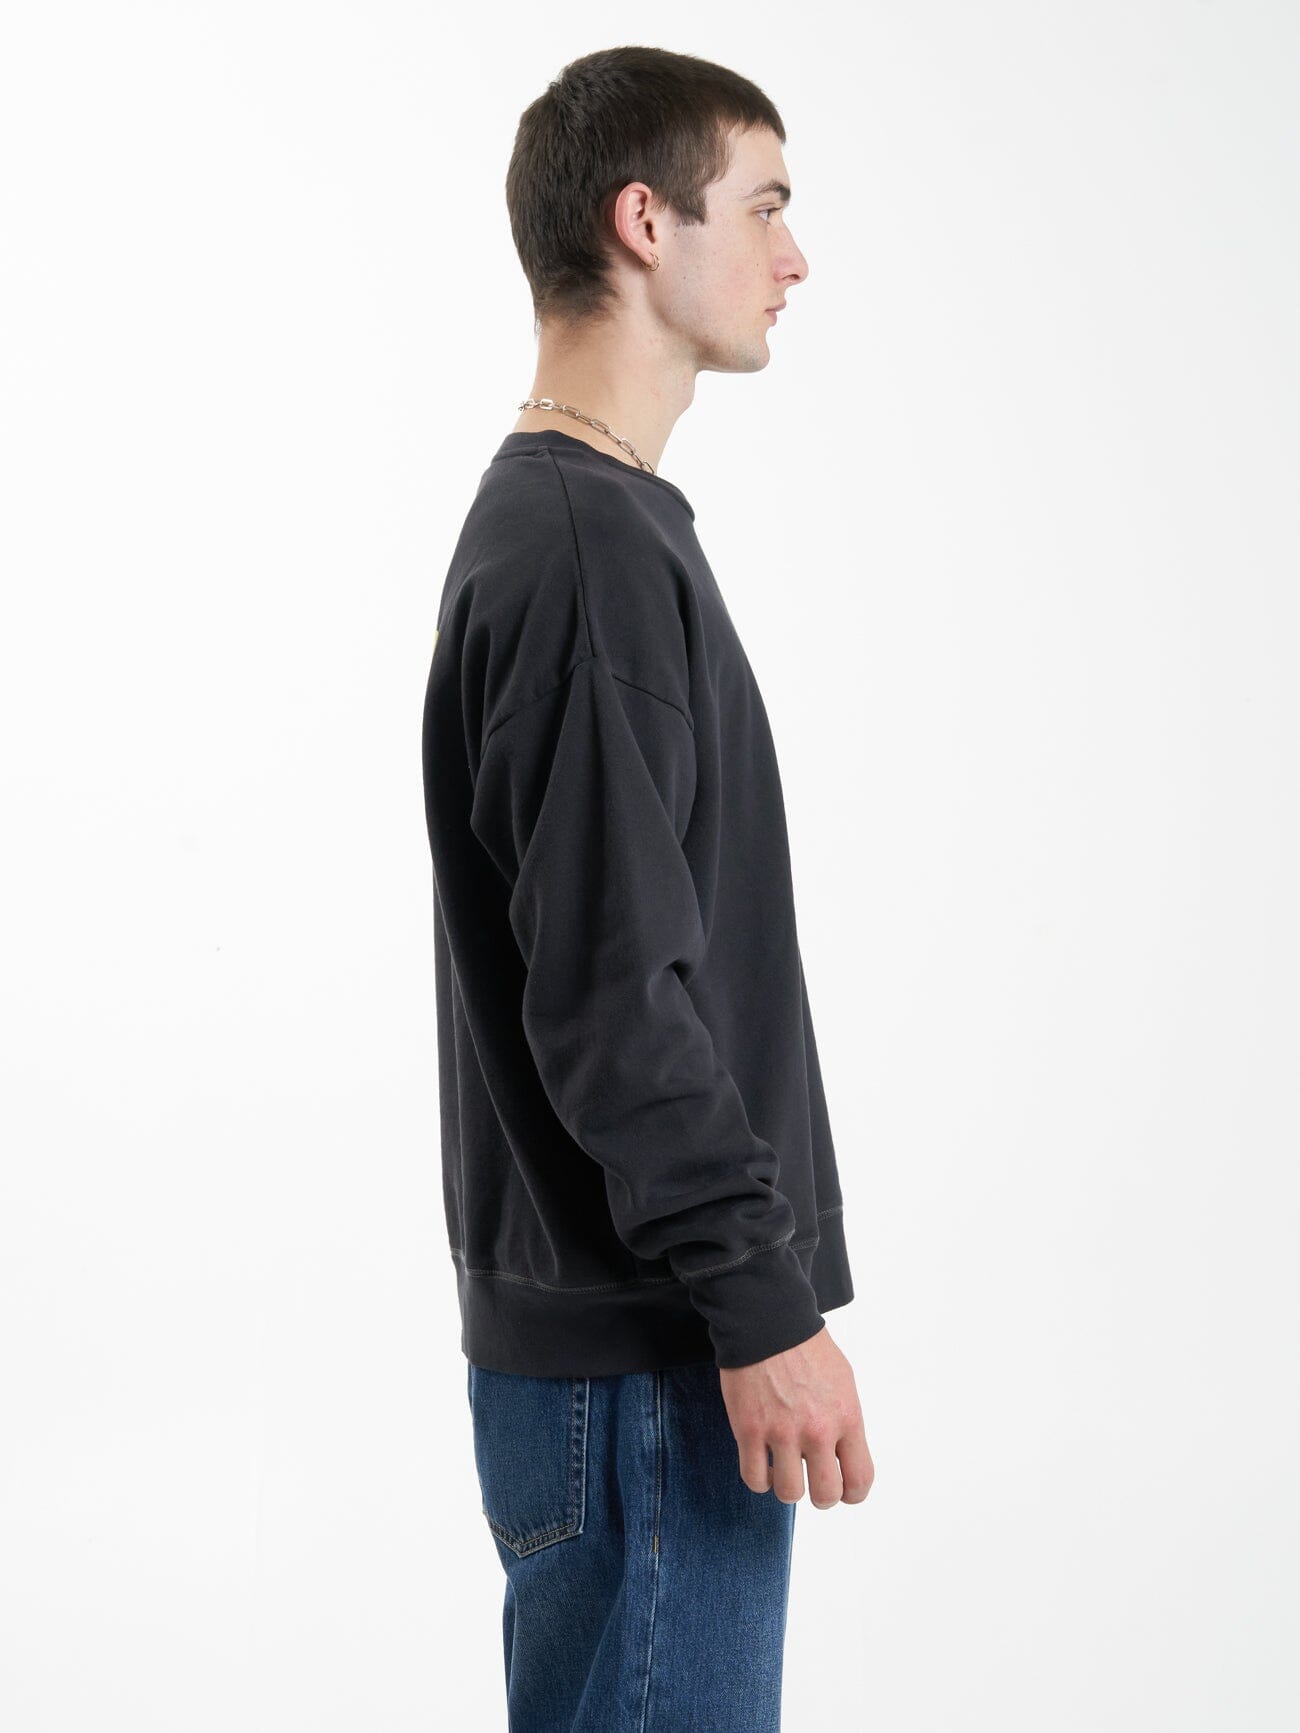 Modern Spiritualism Slouch Fit Crew - Washed Black